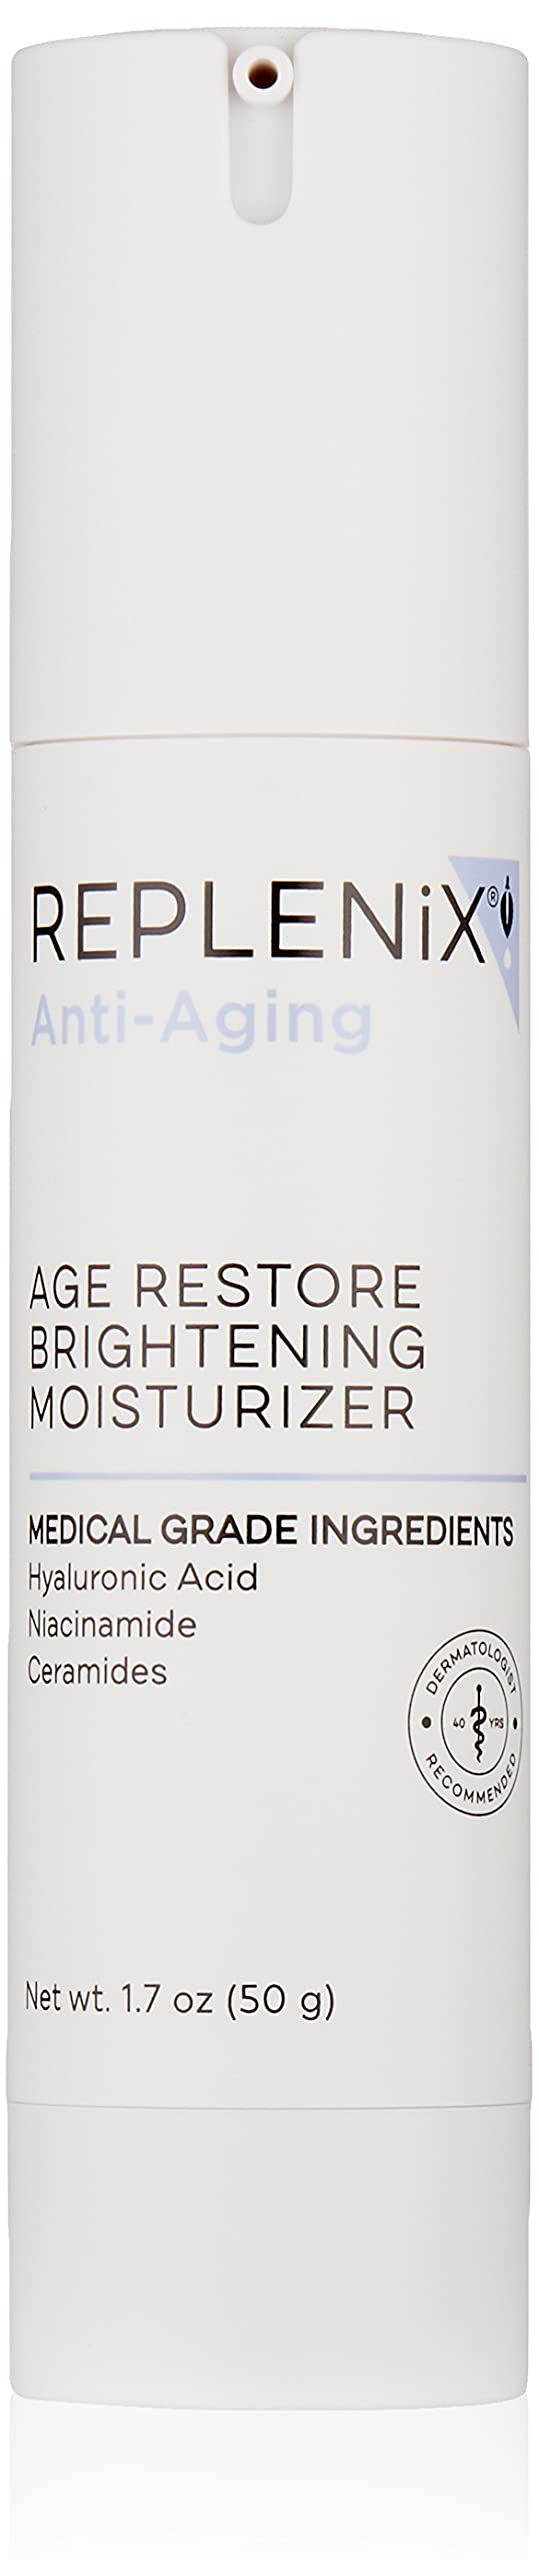 Replenix Age Restore Brightening Moisturizer - Medical Grade Anti-Aging Facial Lotion with Hyaluronic Acid, Oil Free, Fragrance Free, 1.7 oz.